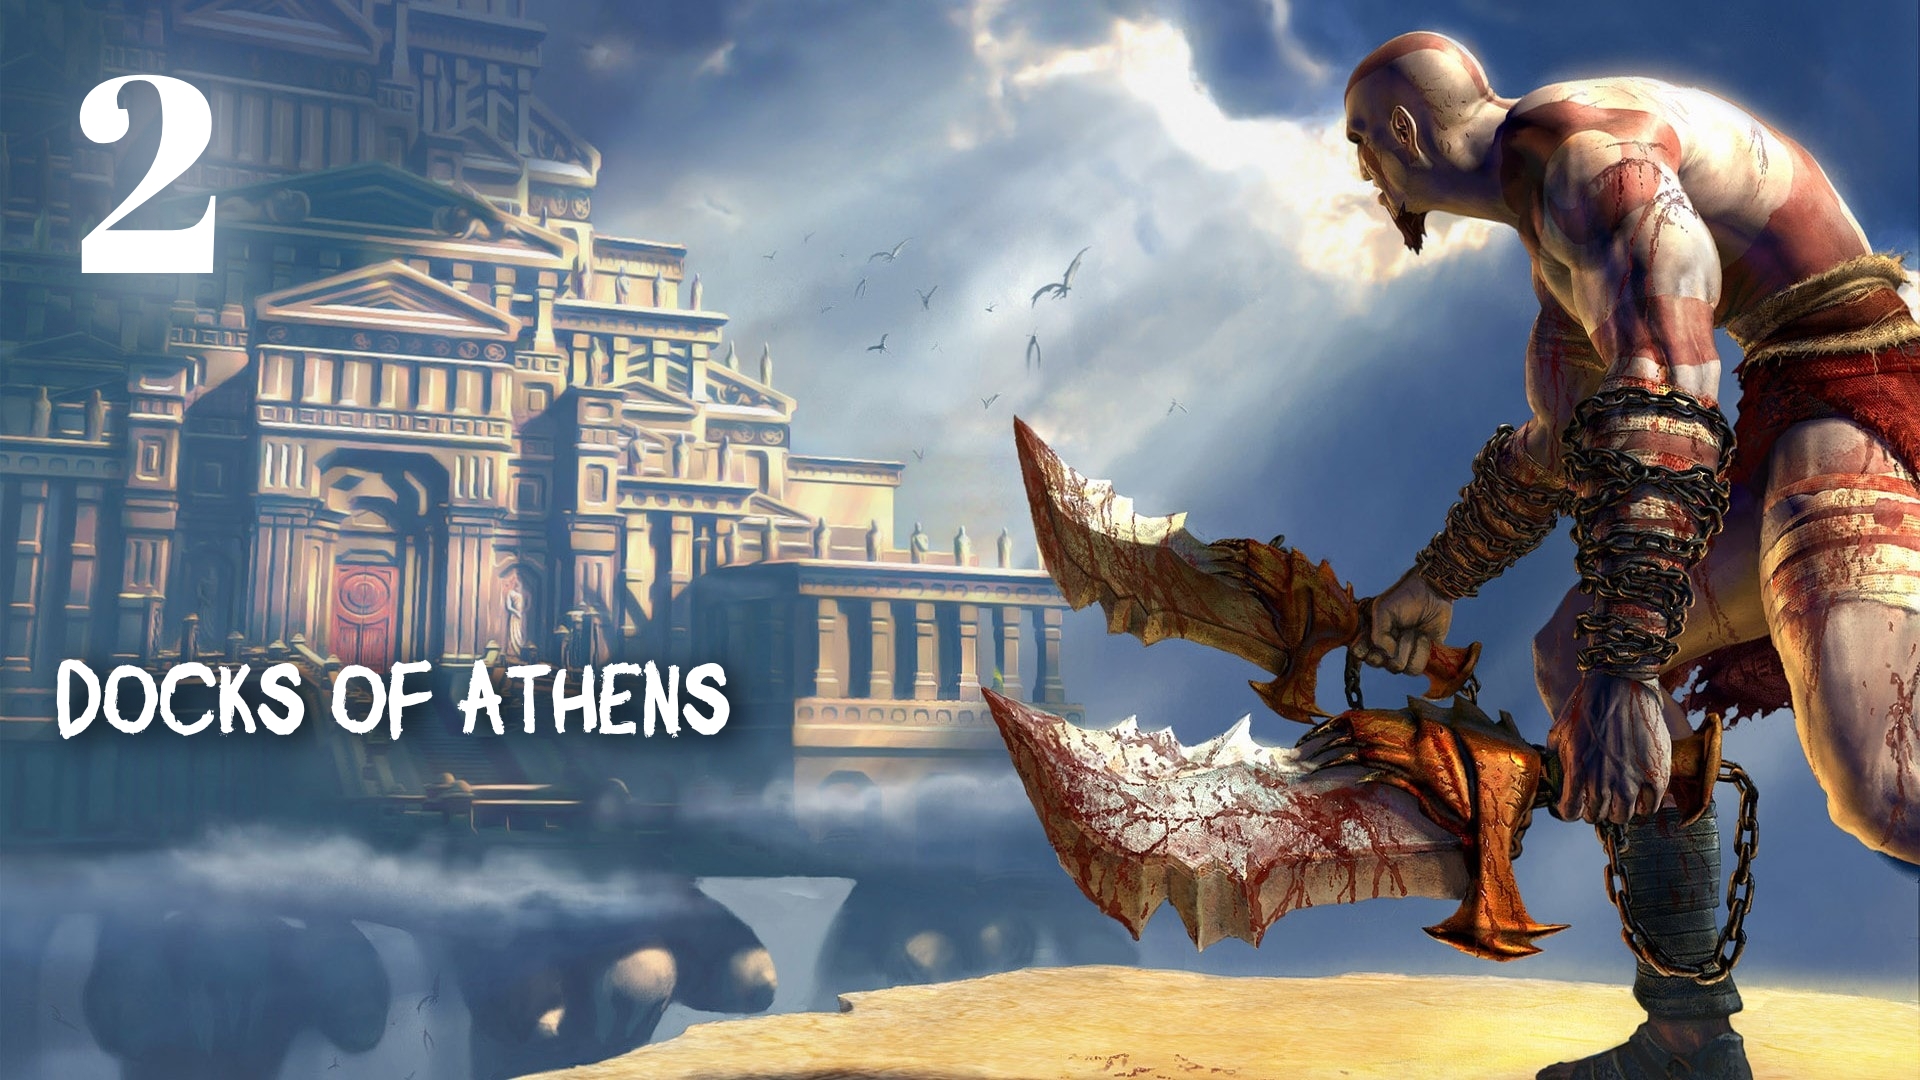 God of War HD The Gates of Athens: Docks of Athens